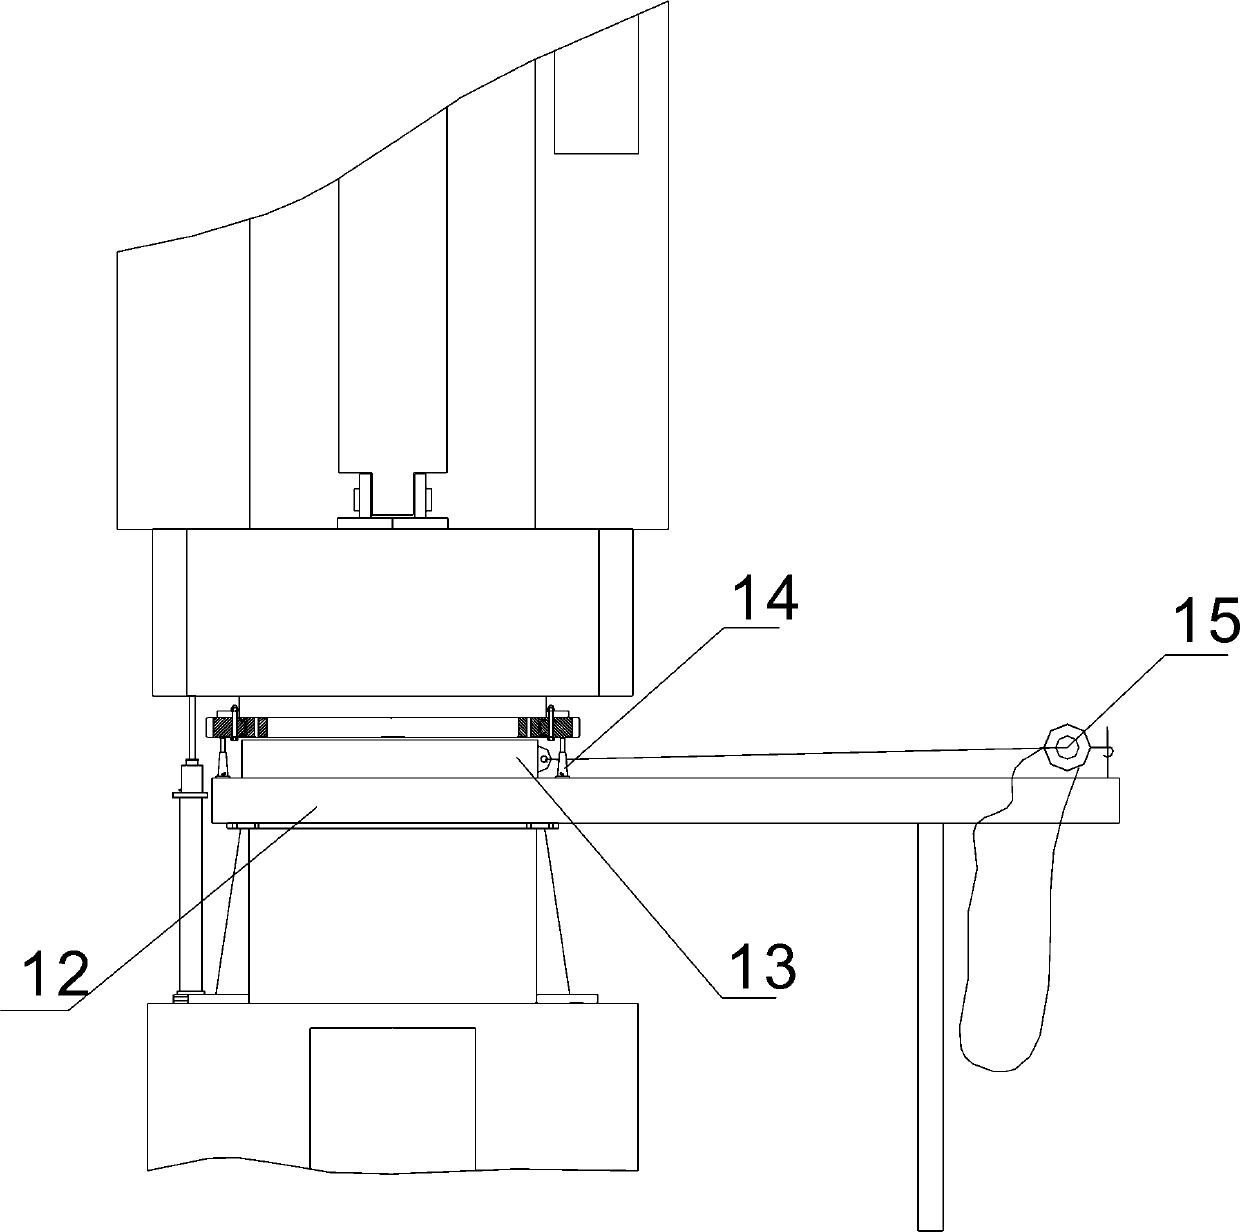 Method for replacing bearing of large ladle turret